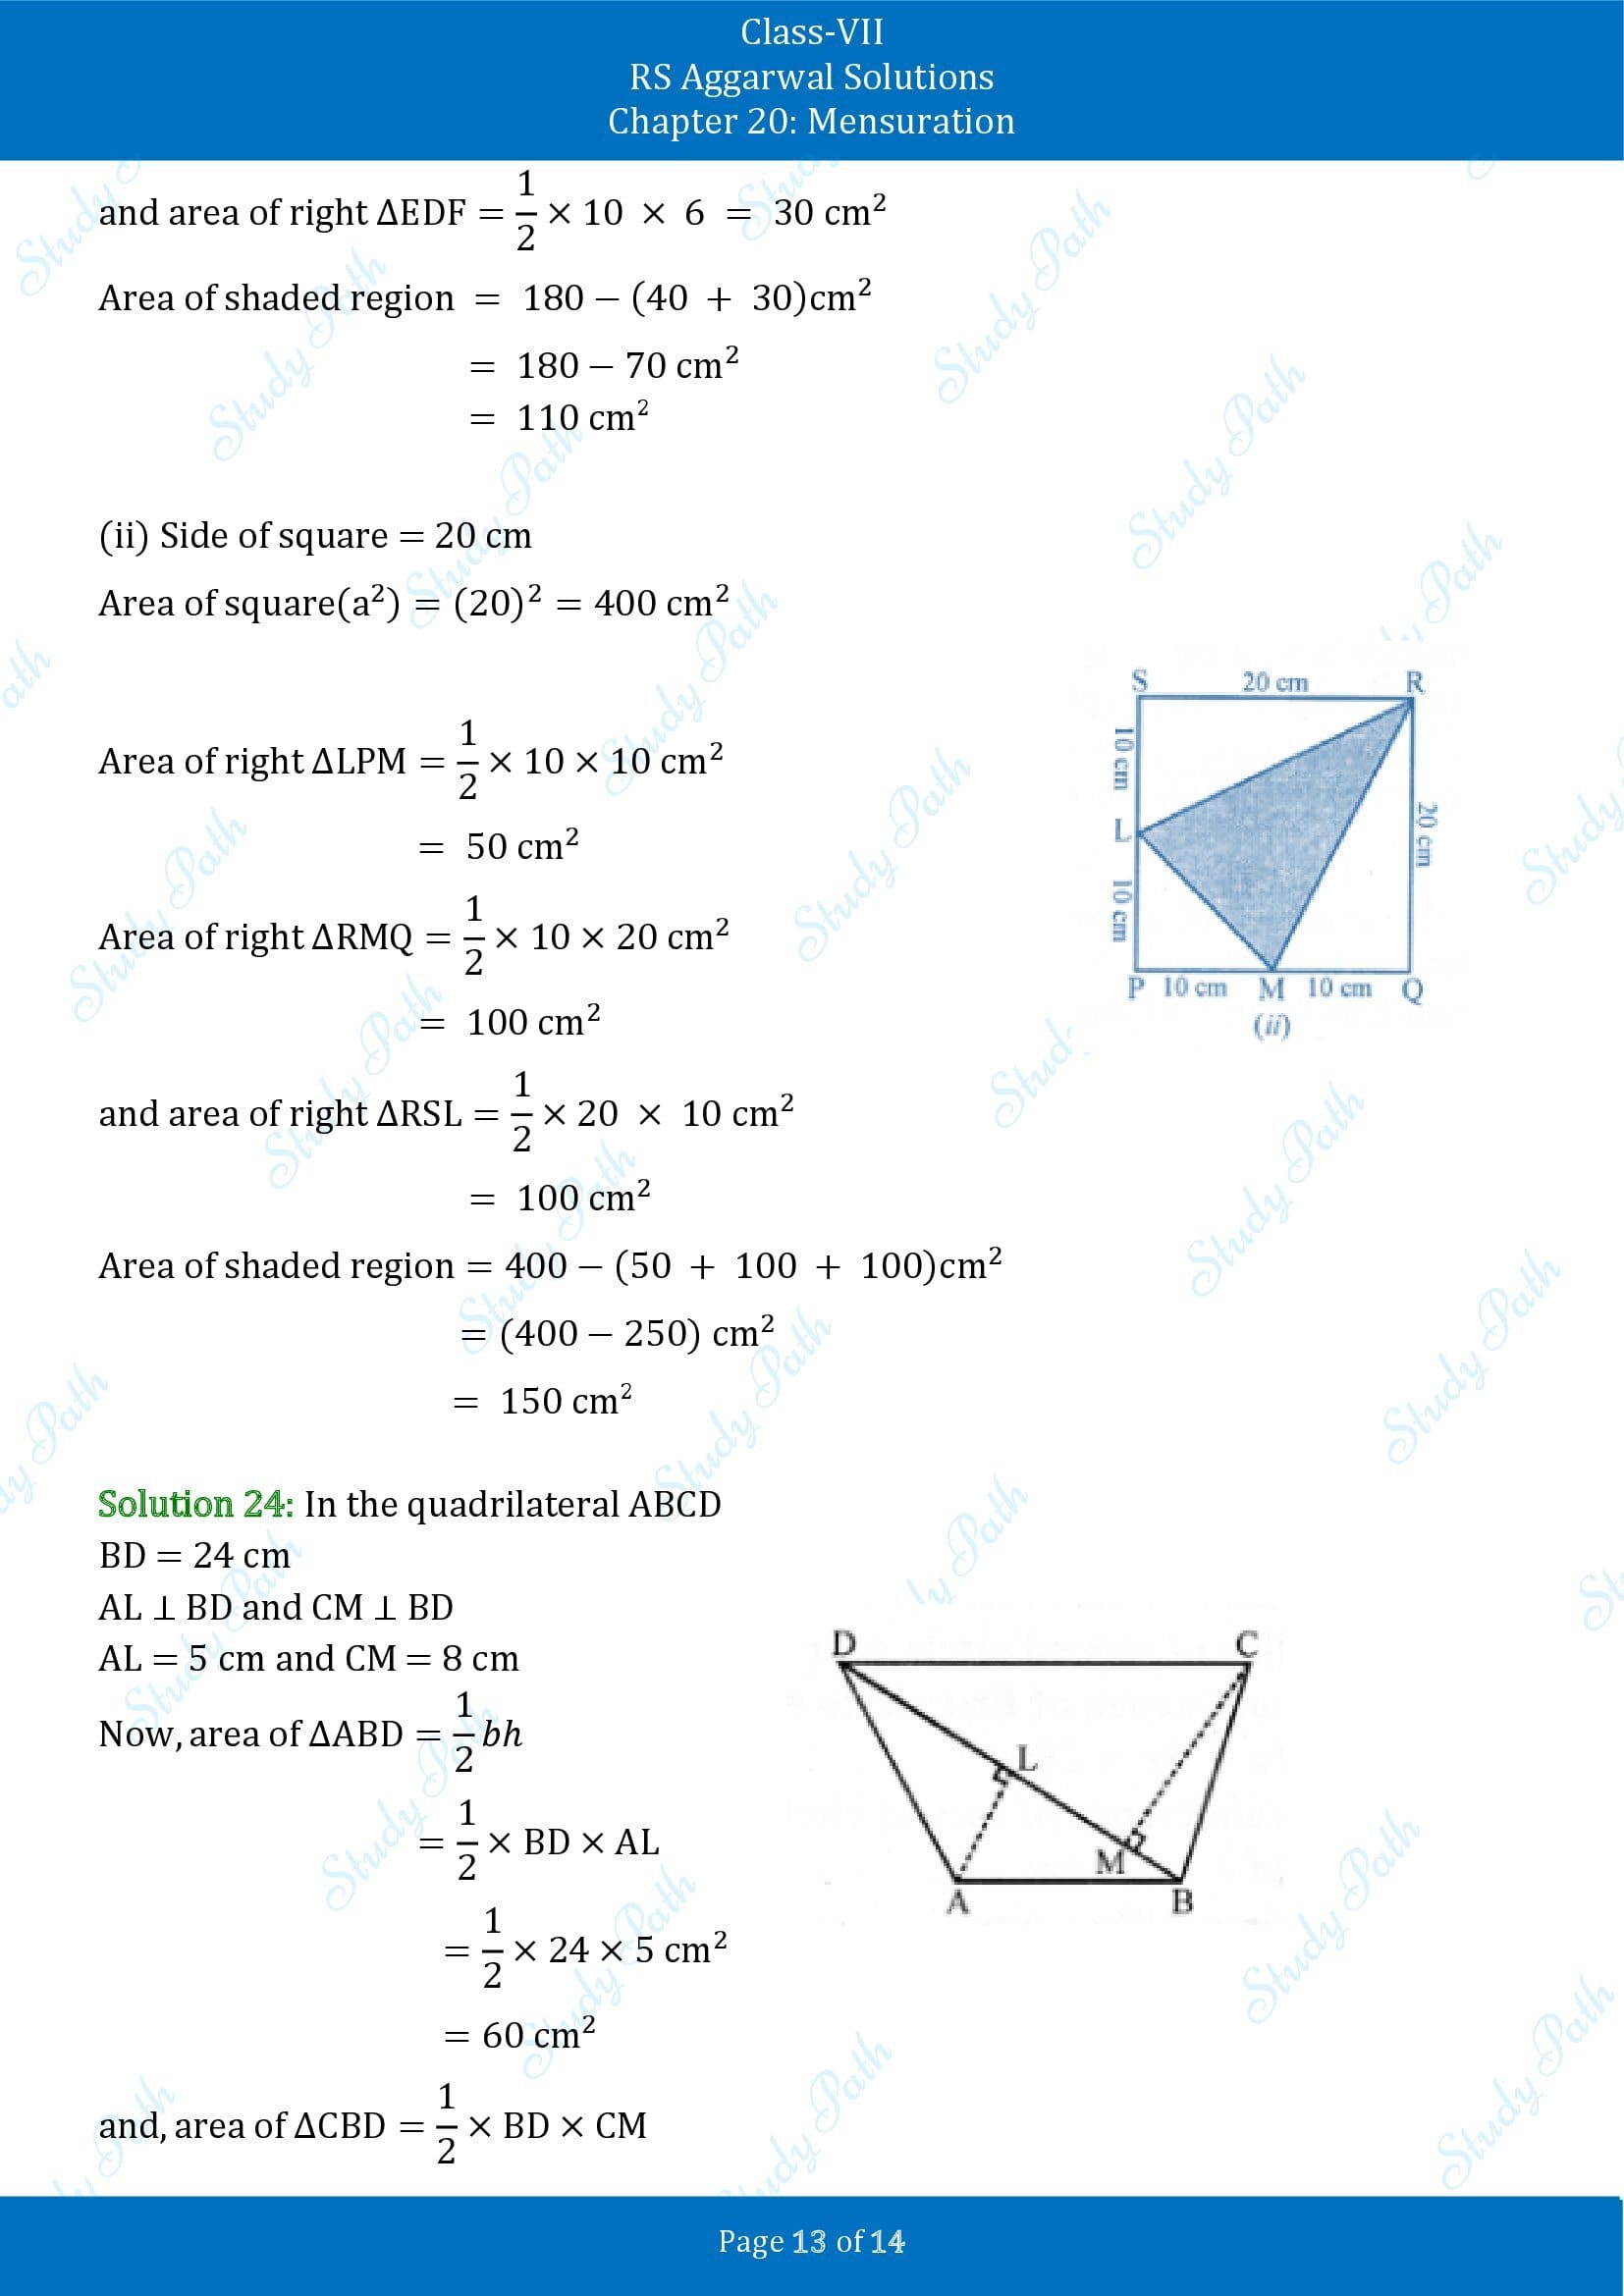 RS Aggarwal Solutions Class 7 Chapter 20 Mensuration Exercise 20D 00013